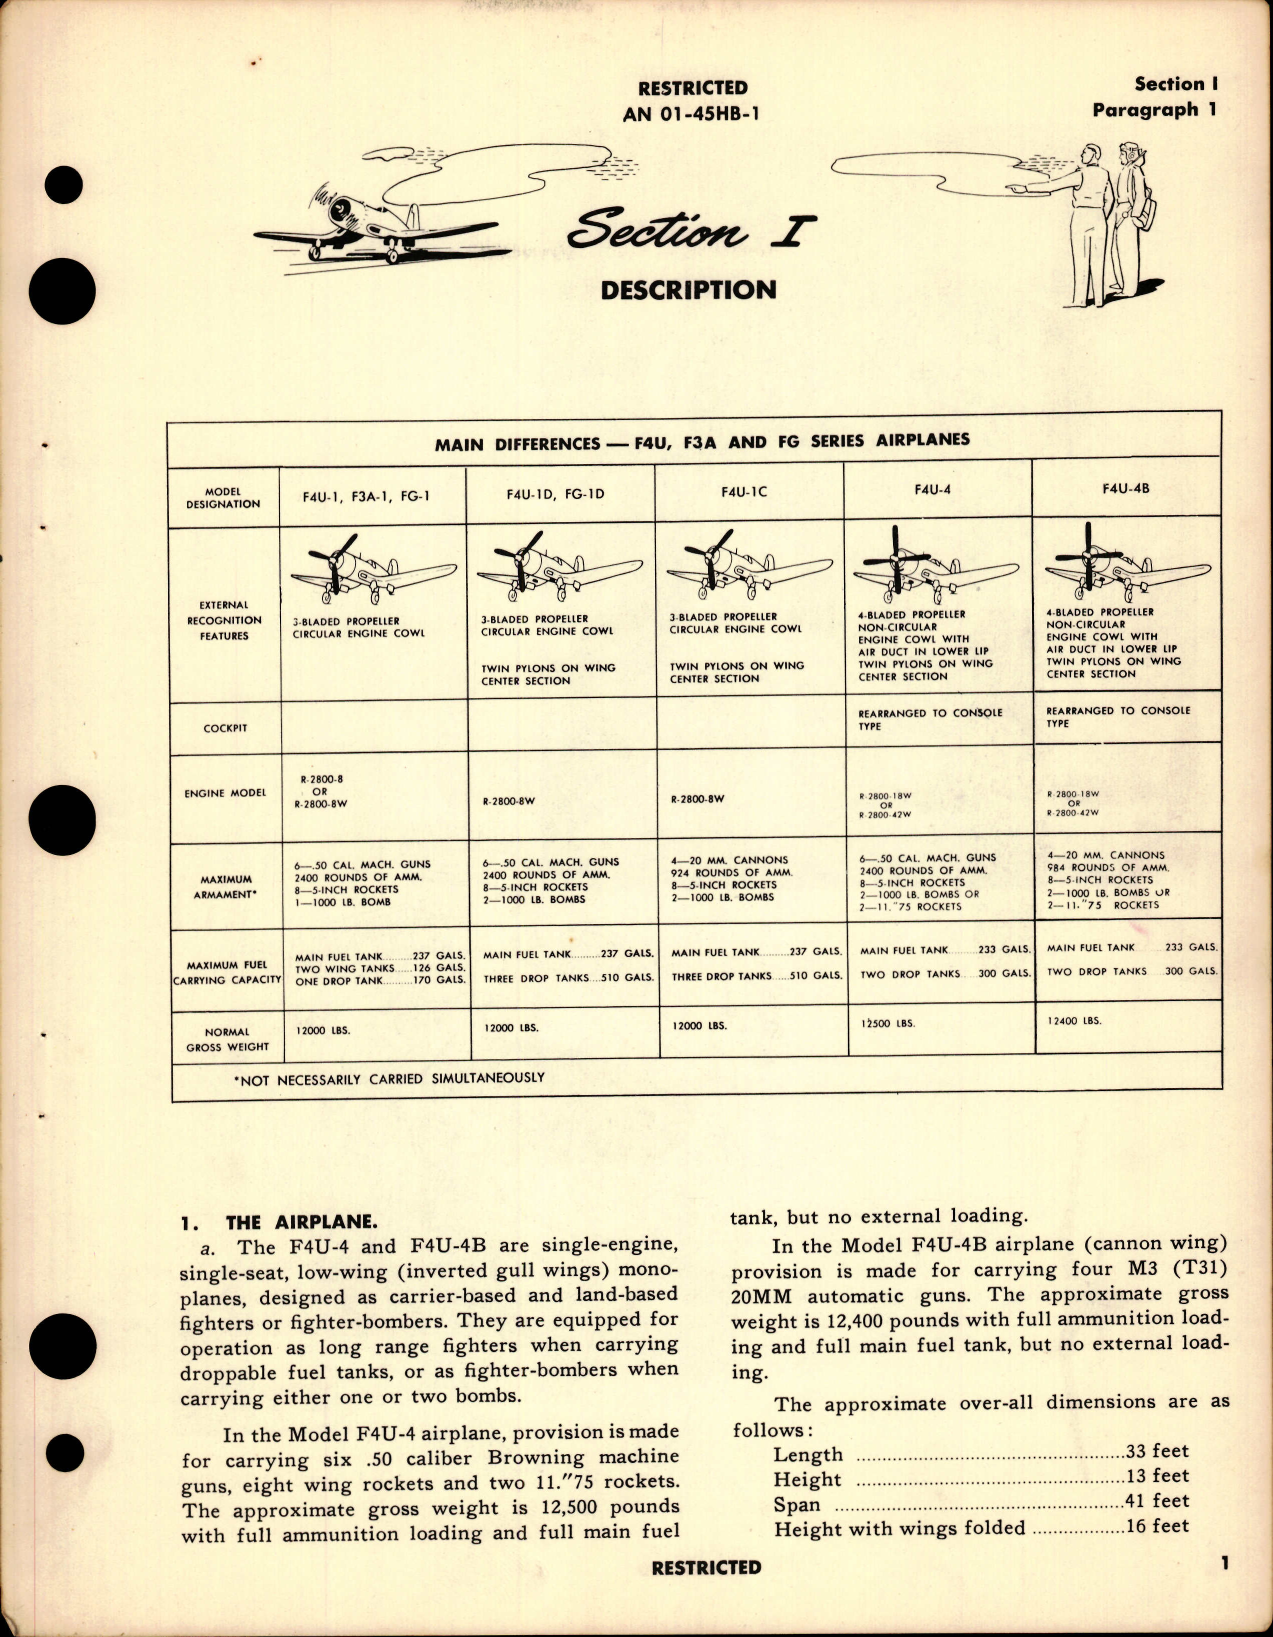 Sample page 7 from AirCorps Library document: Pilot's Handbook for F4U-4, F4U-4B